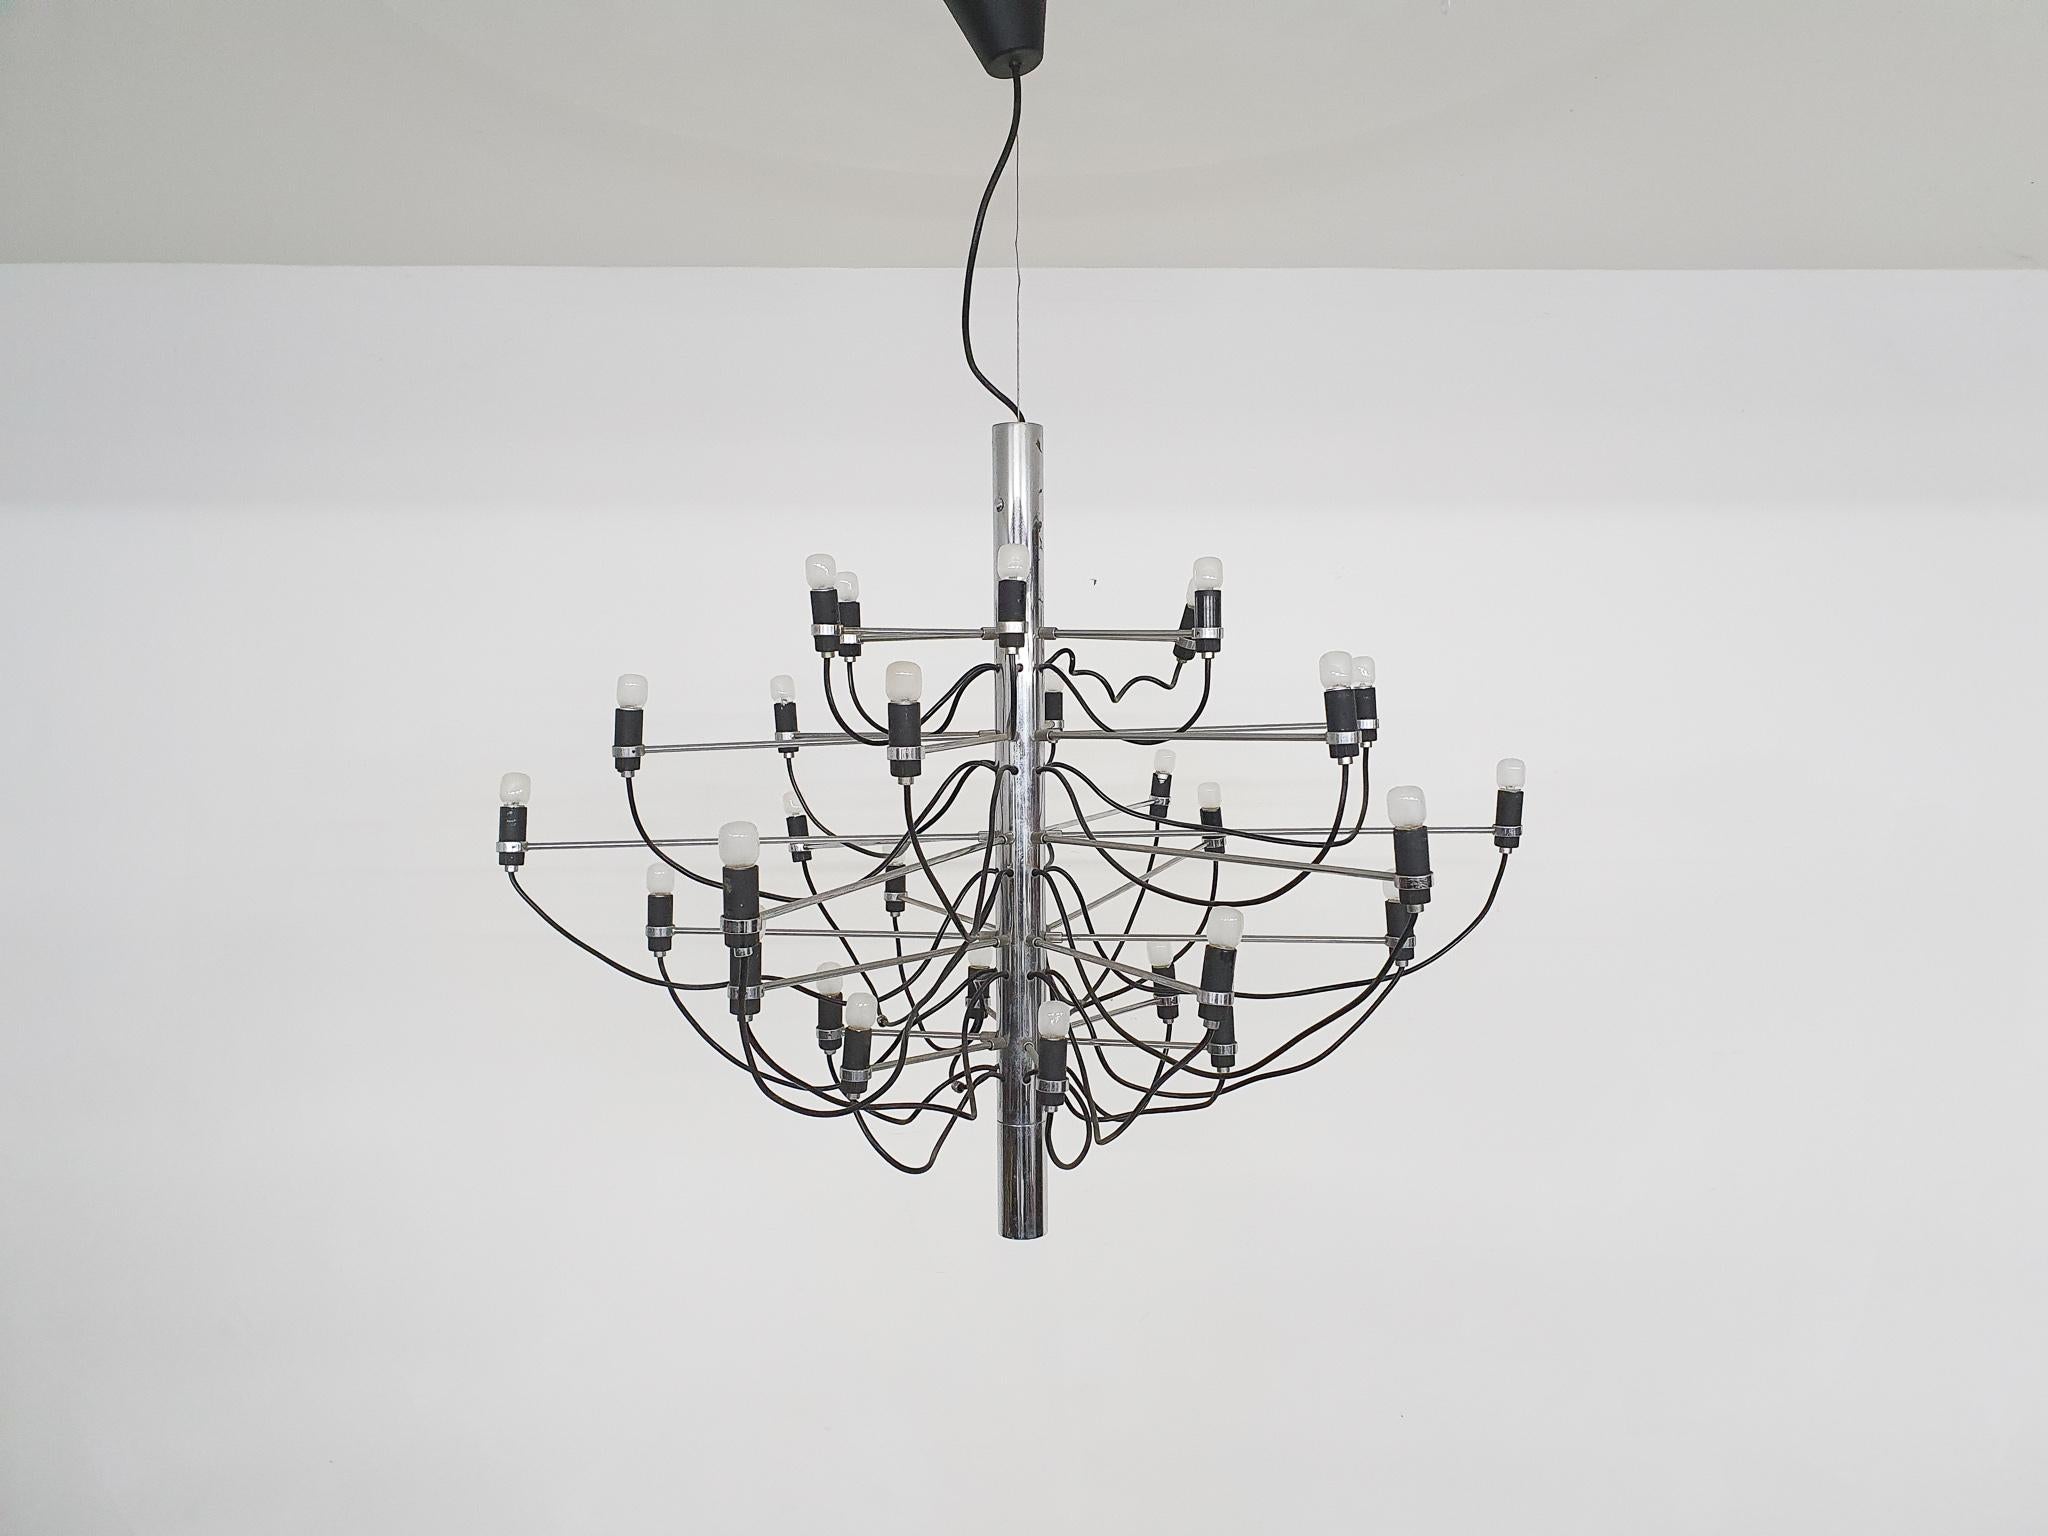 Gino Sarfatti for Arteluce 2097/30 chandelier. Chromed metal chandelier with 30x E14 light bulbs. Some fittings are a bit damaged trough age, and the metal has some rust spots.

Gino Sarfatti was probably the most important lighting designer of